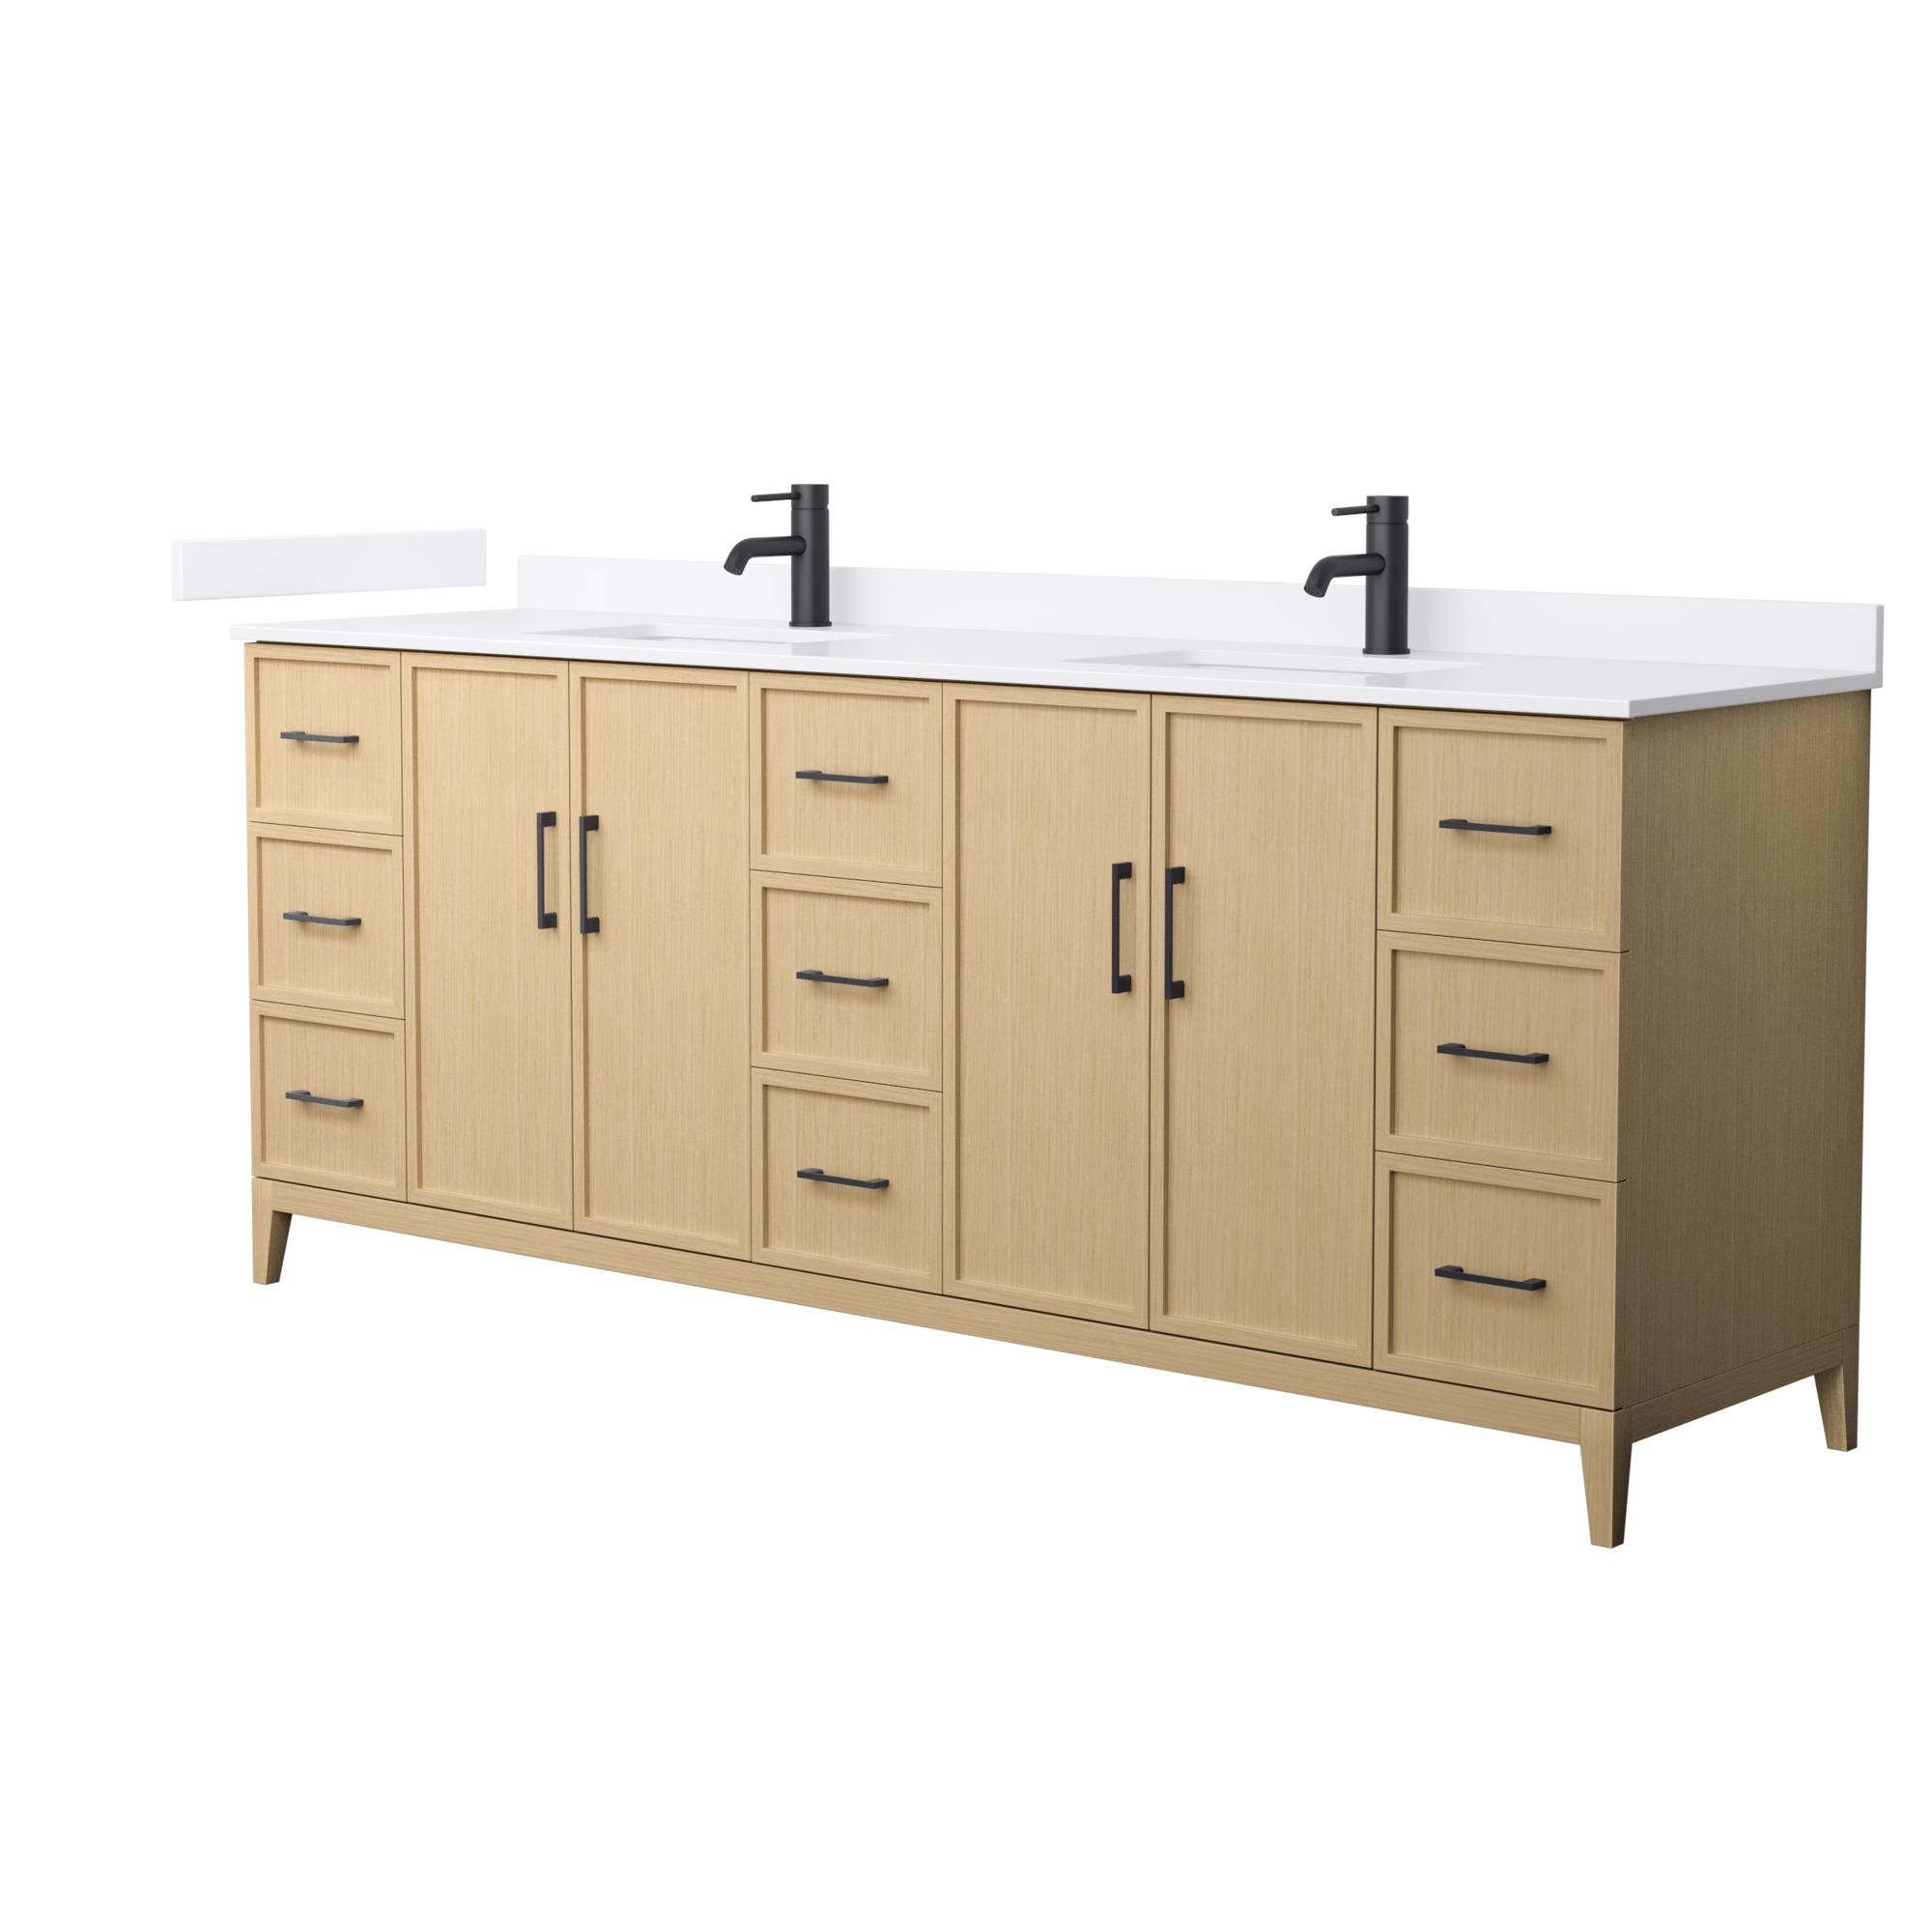 84" Transitional Double Vanity Base in White Oak, 7 Top Options with 2 Hardware Option